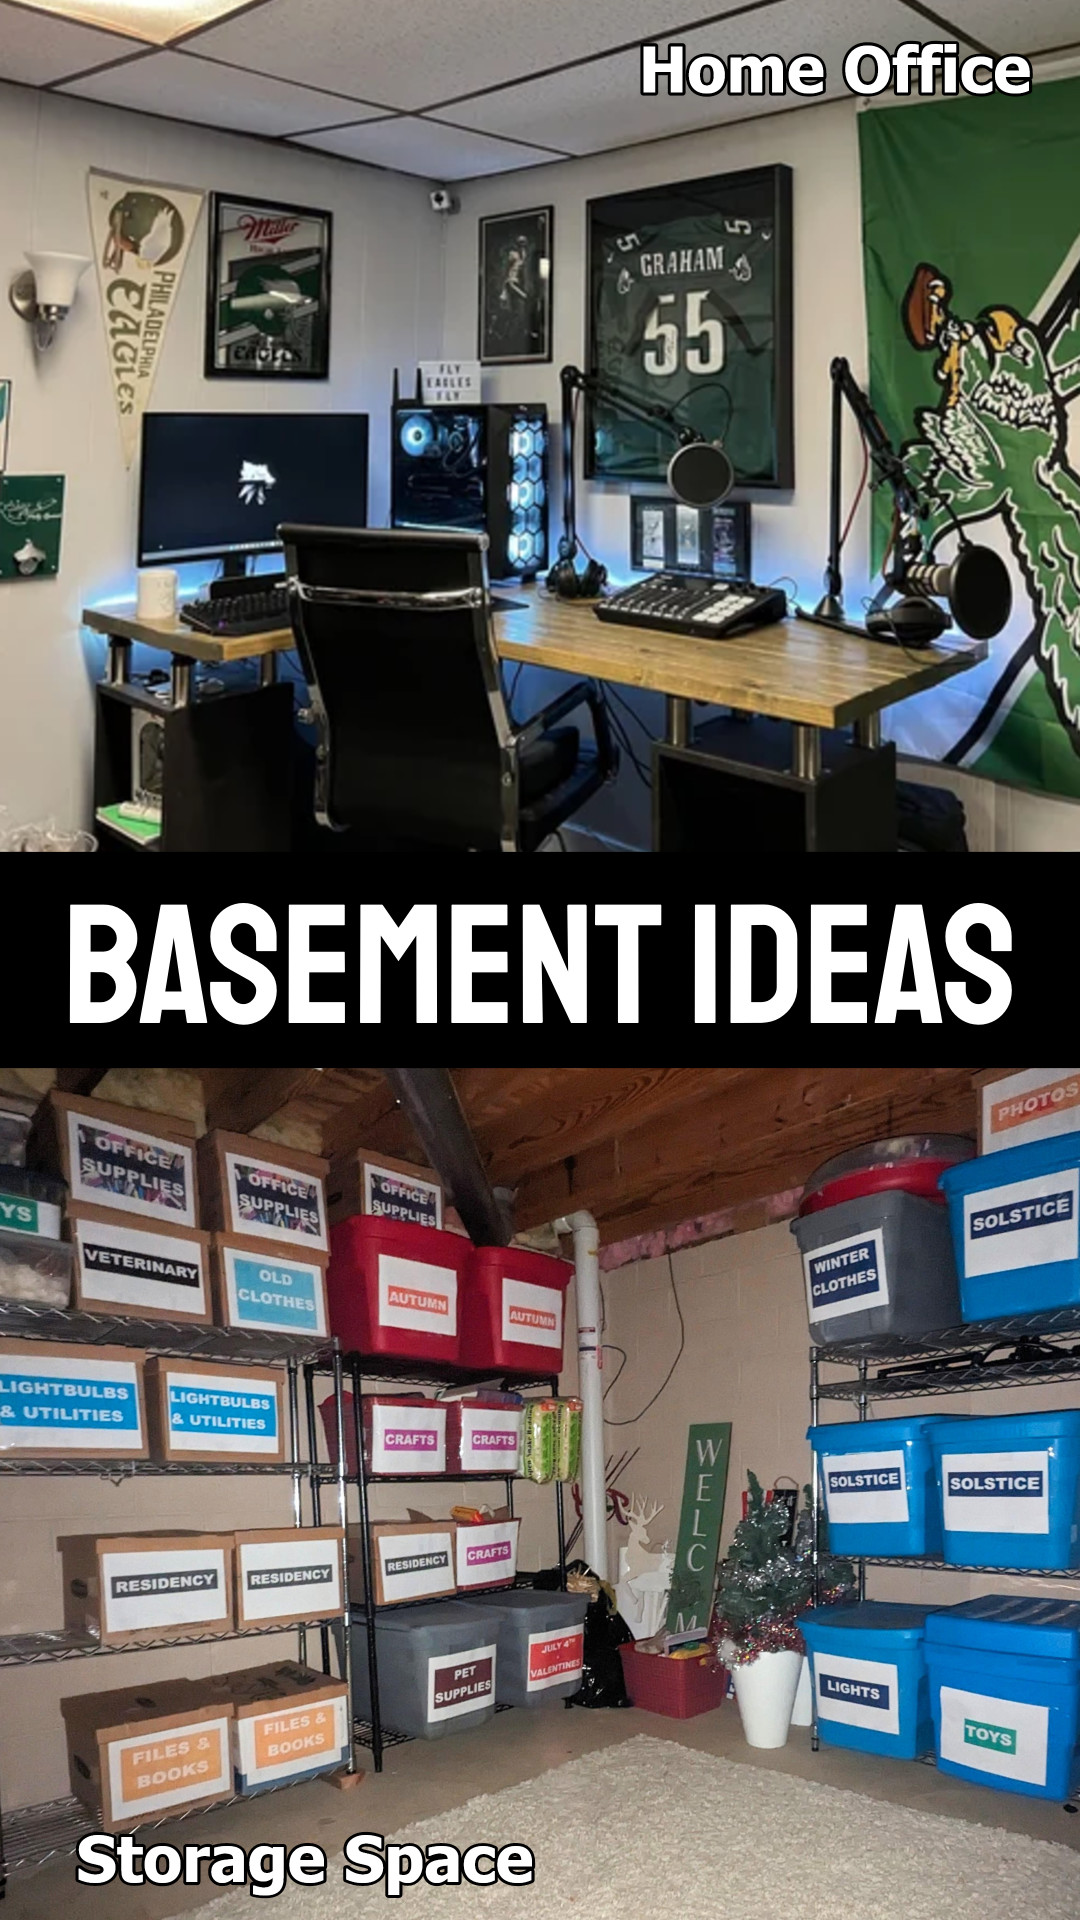 basment ideas home office storage space